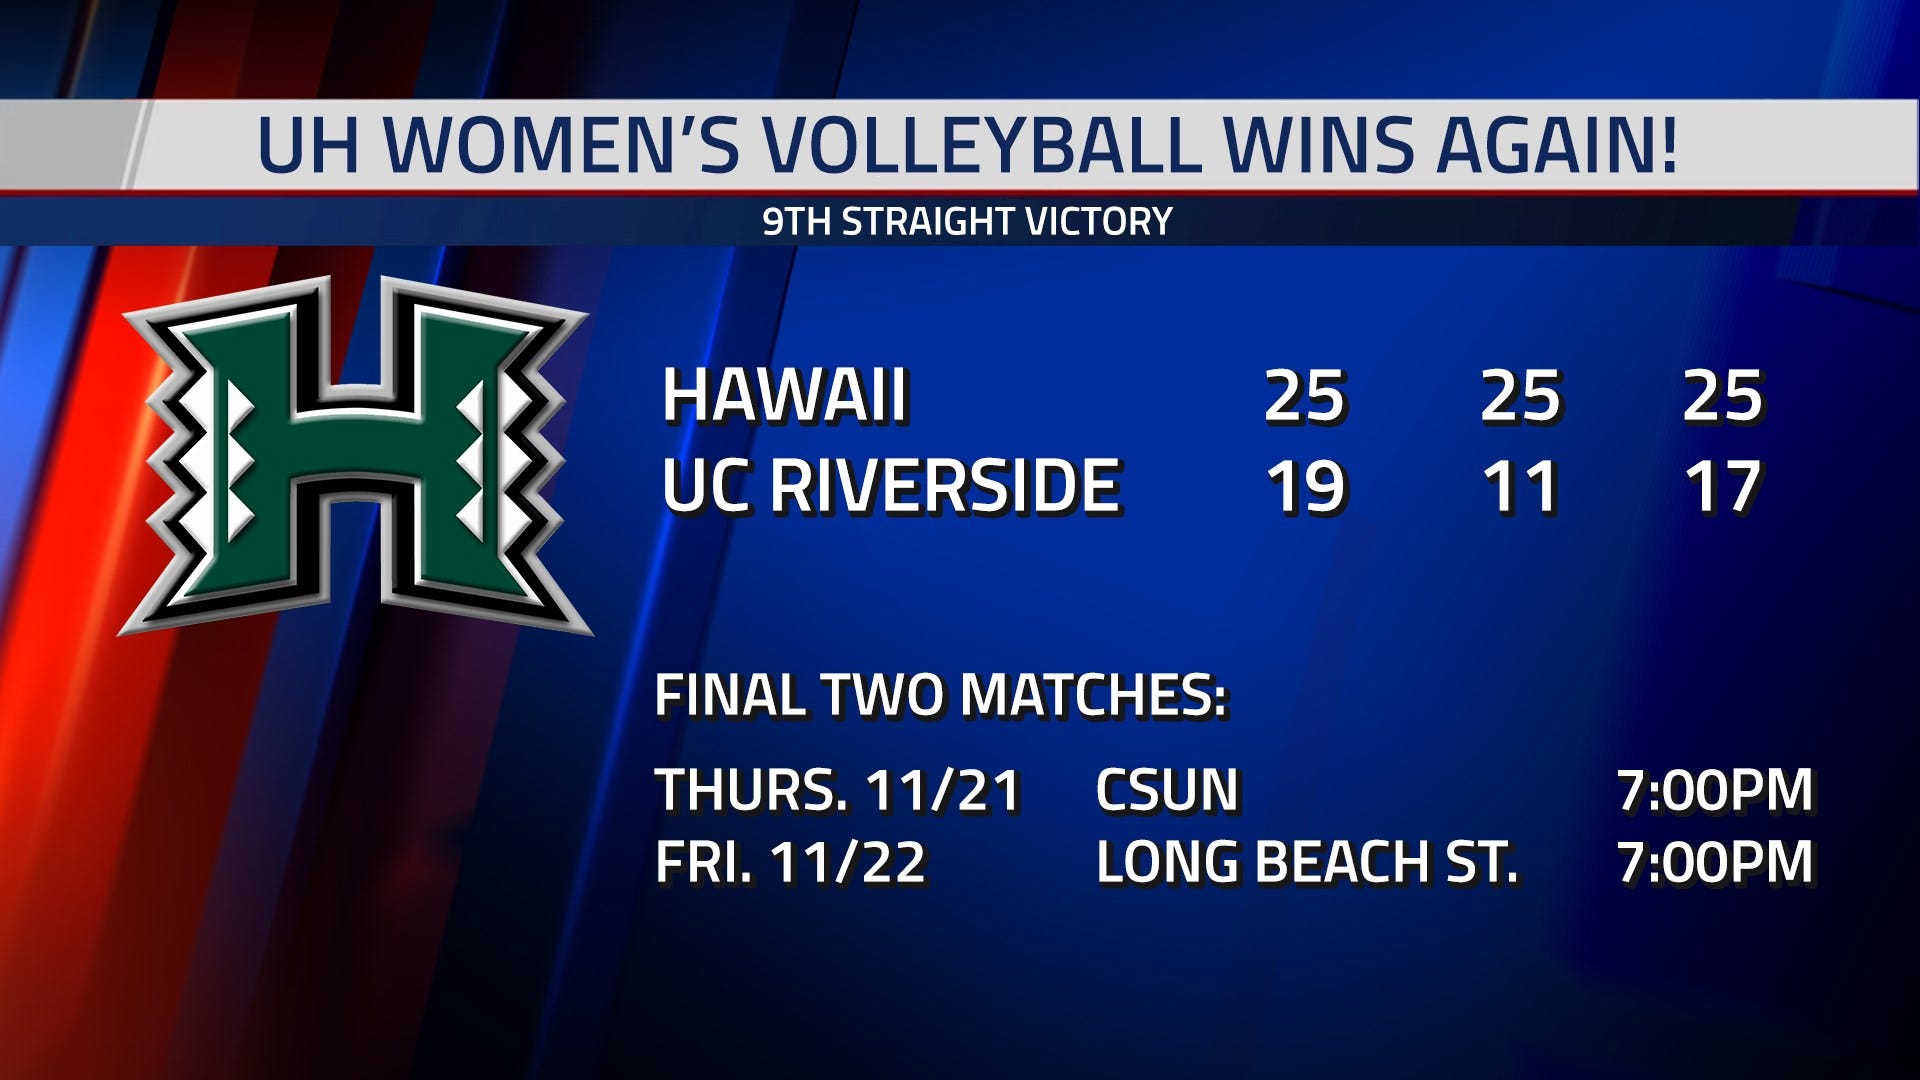 Uh Volleyball Sweeps Uc Riverside To Remain In Big West Control